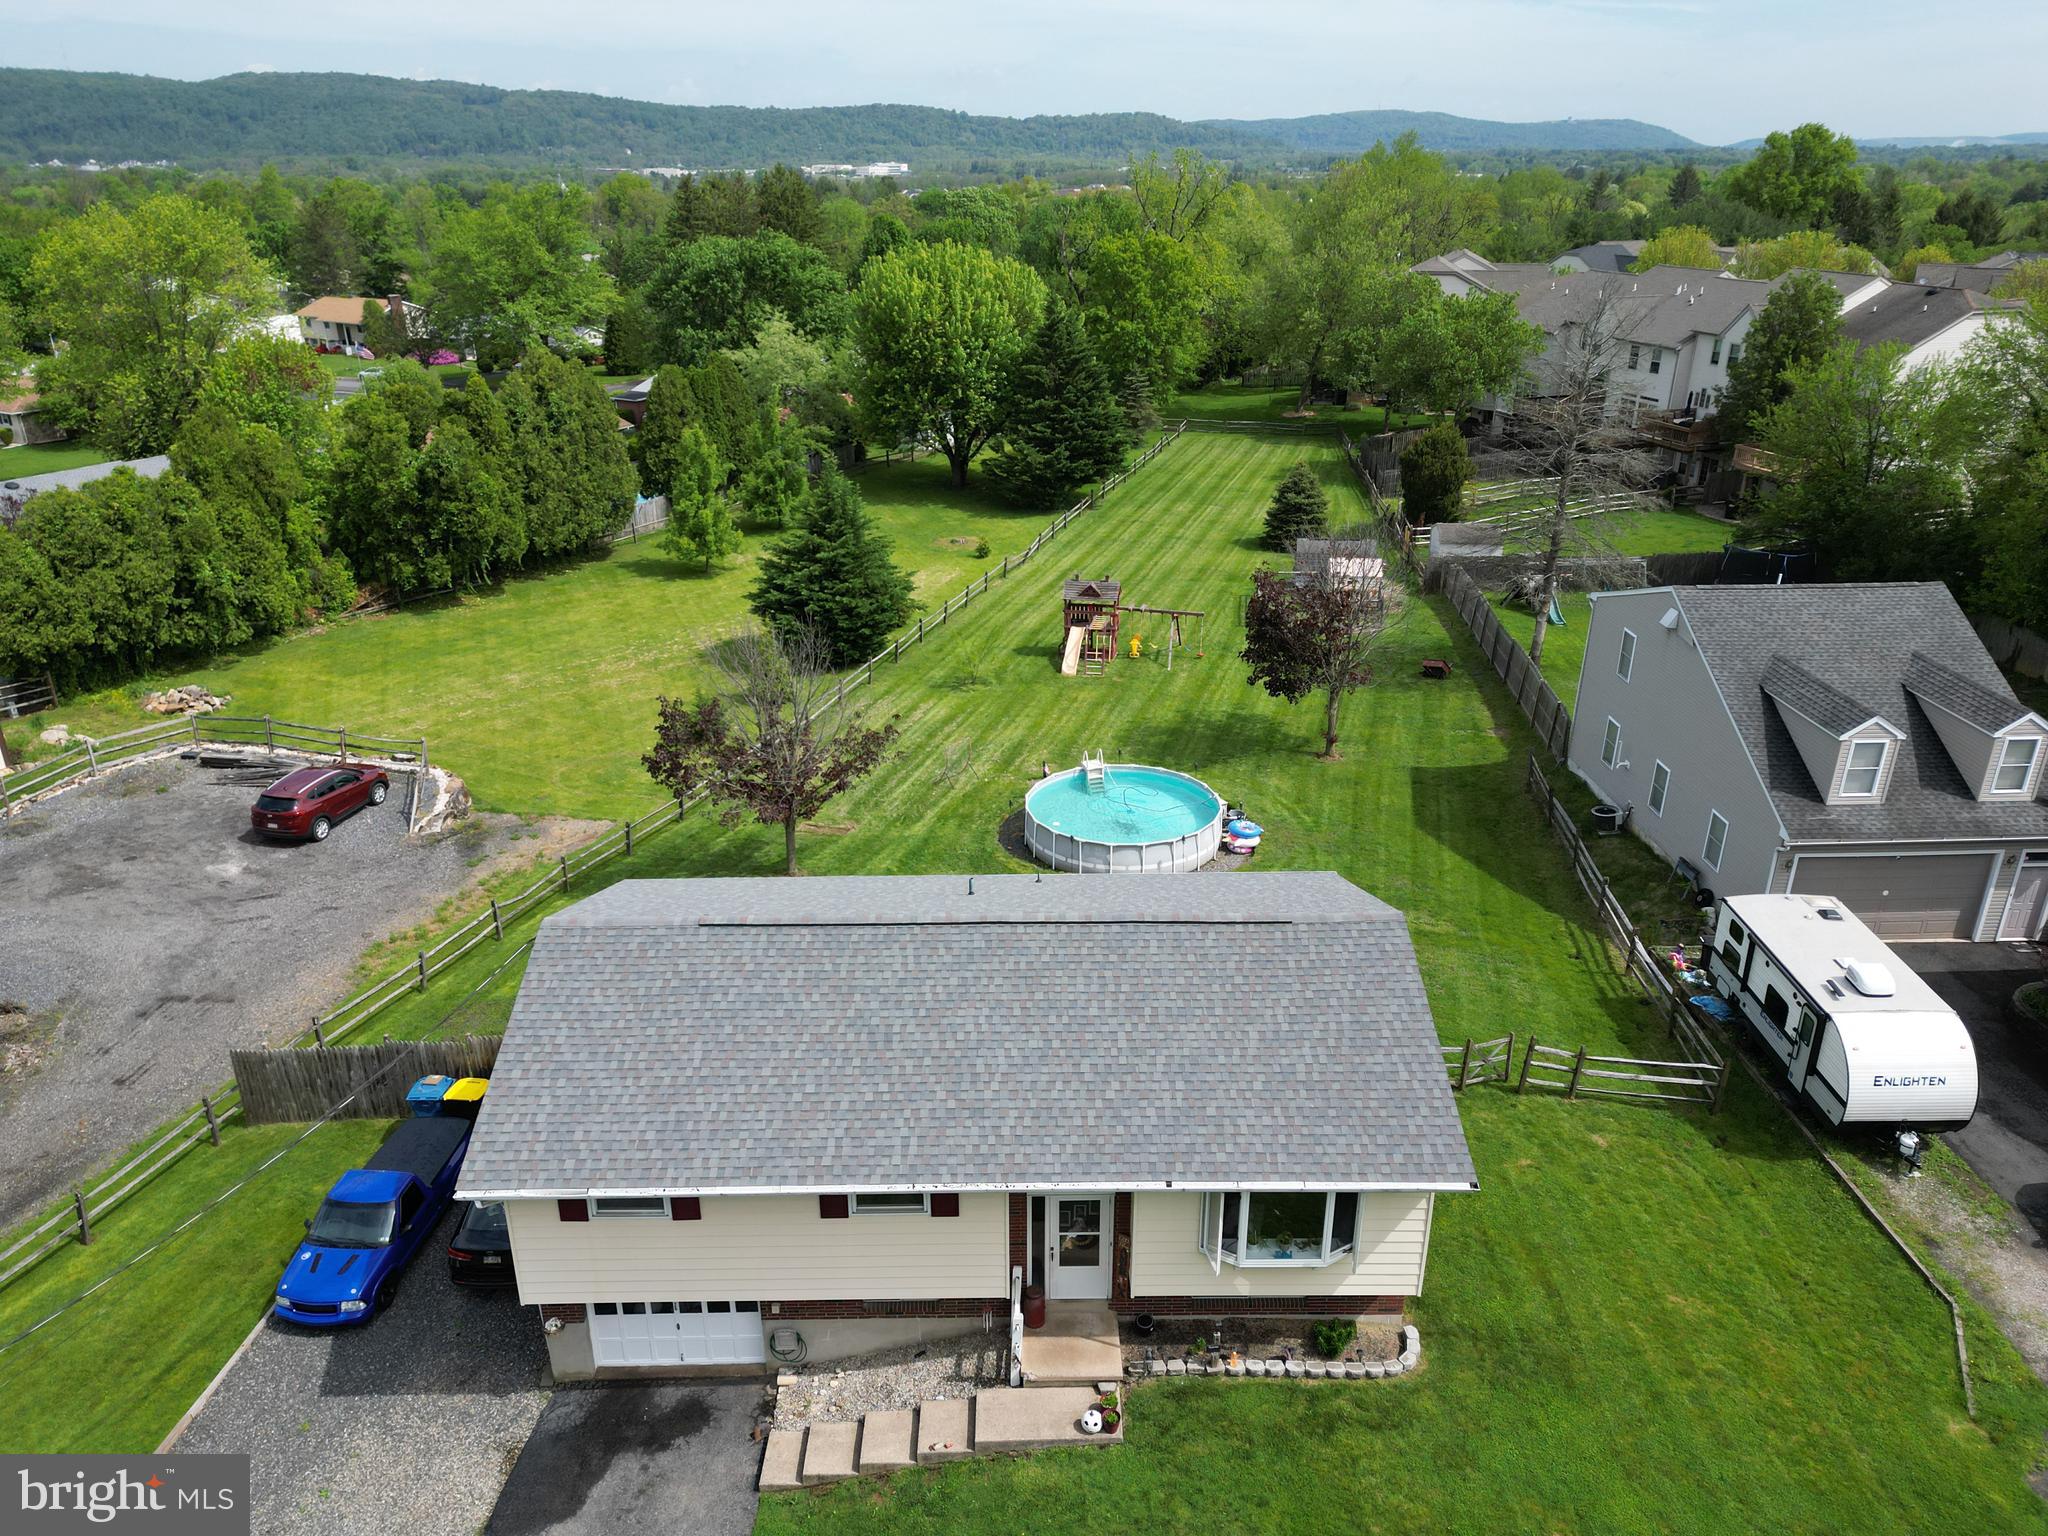 an aerial view of a house with pool garden and mountain view in back